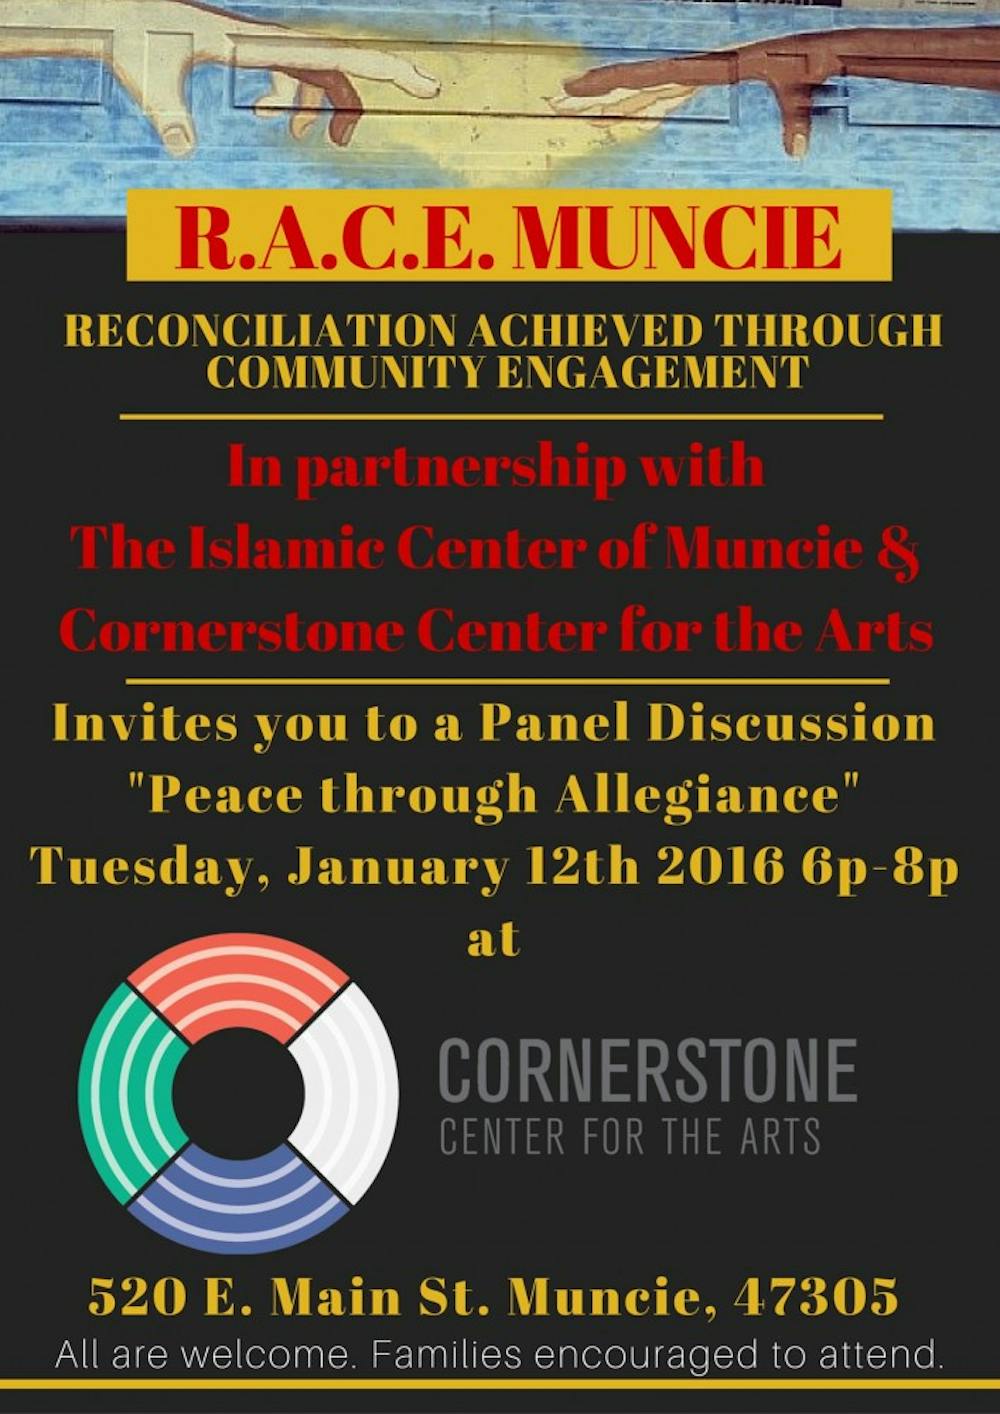 A panel discussion with local Muslim leaders and Ball State students are coming together to talk to the public about the Islamic culture. The discussion is on Jan. 12 from 6-8 p.m. at Cornerstone Center for the Arts. PHOTO COURTESY OF R.A.C.E. MUNCIE FACEBOOK